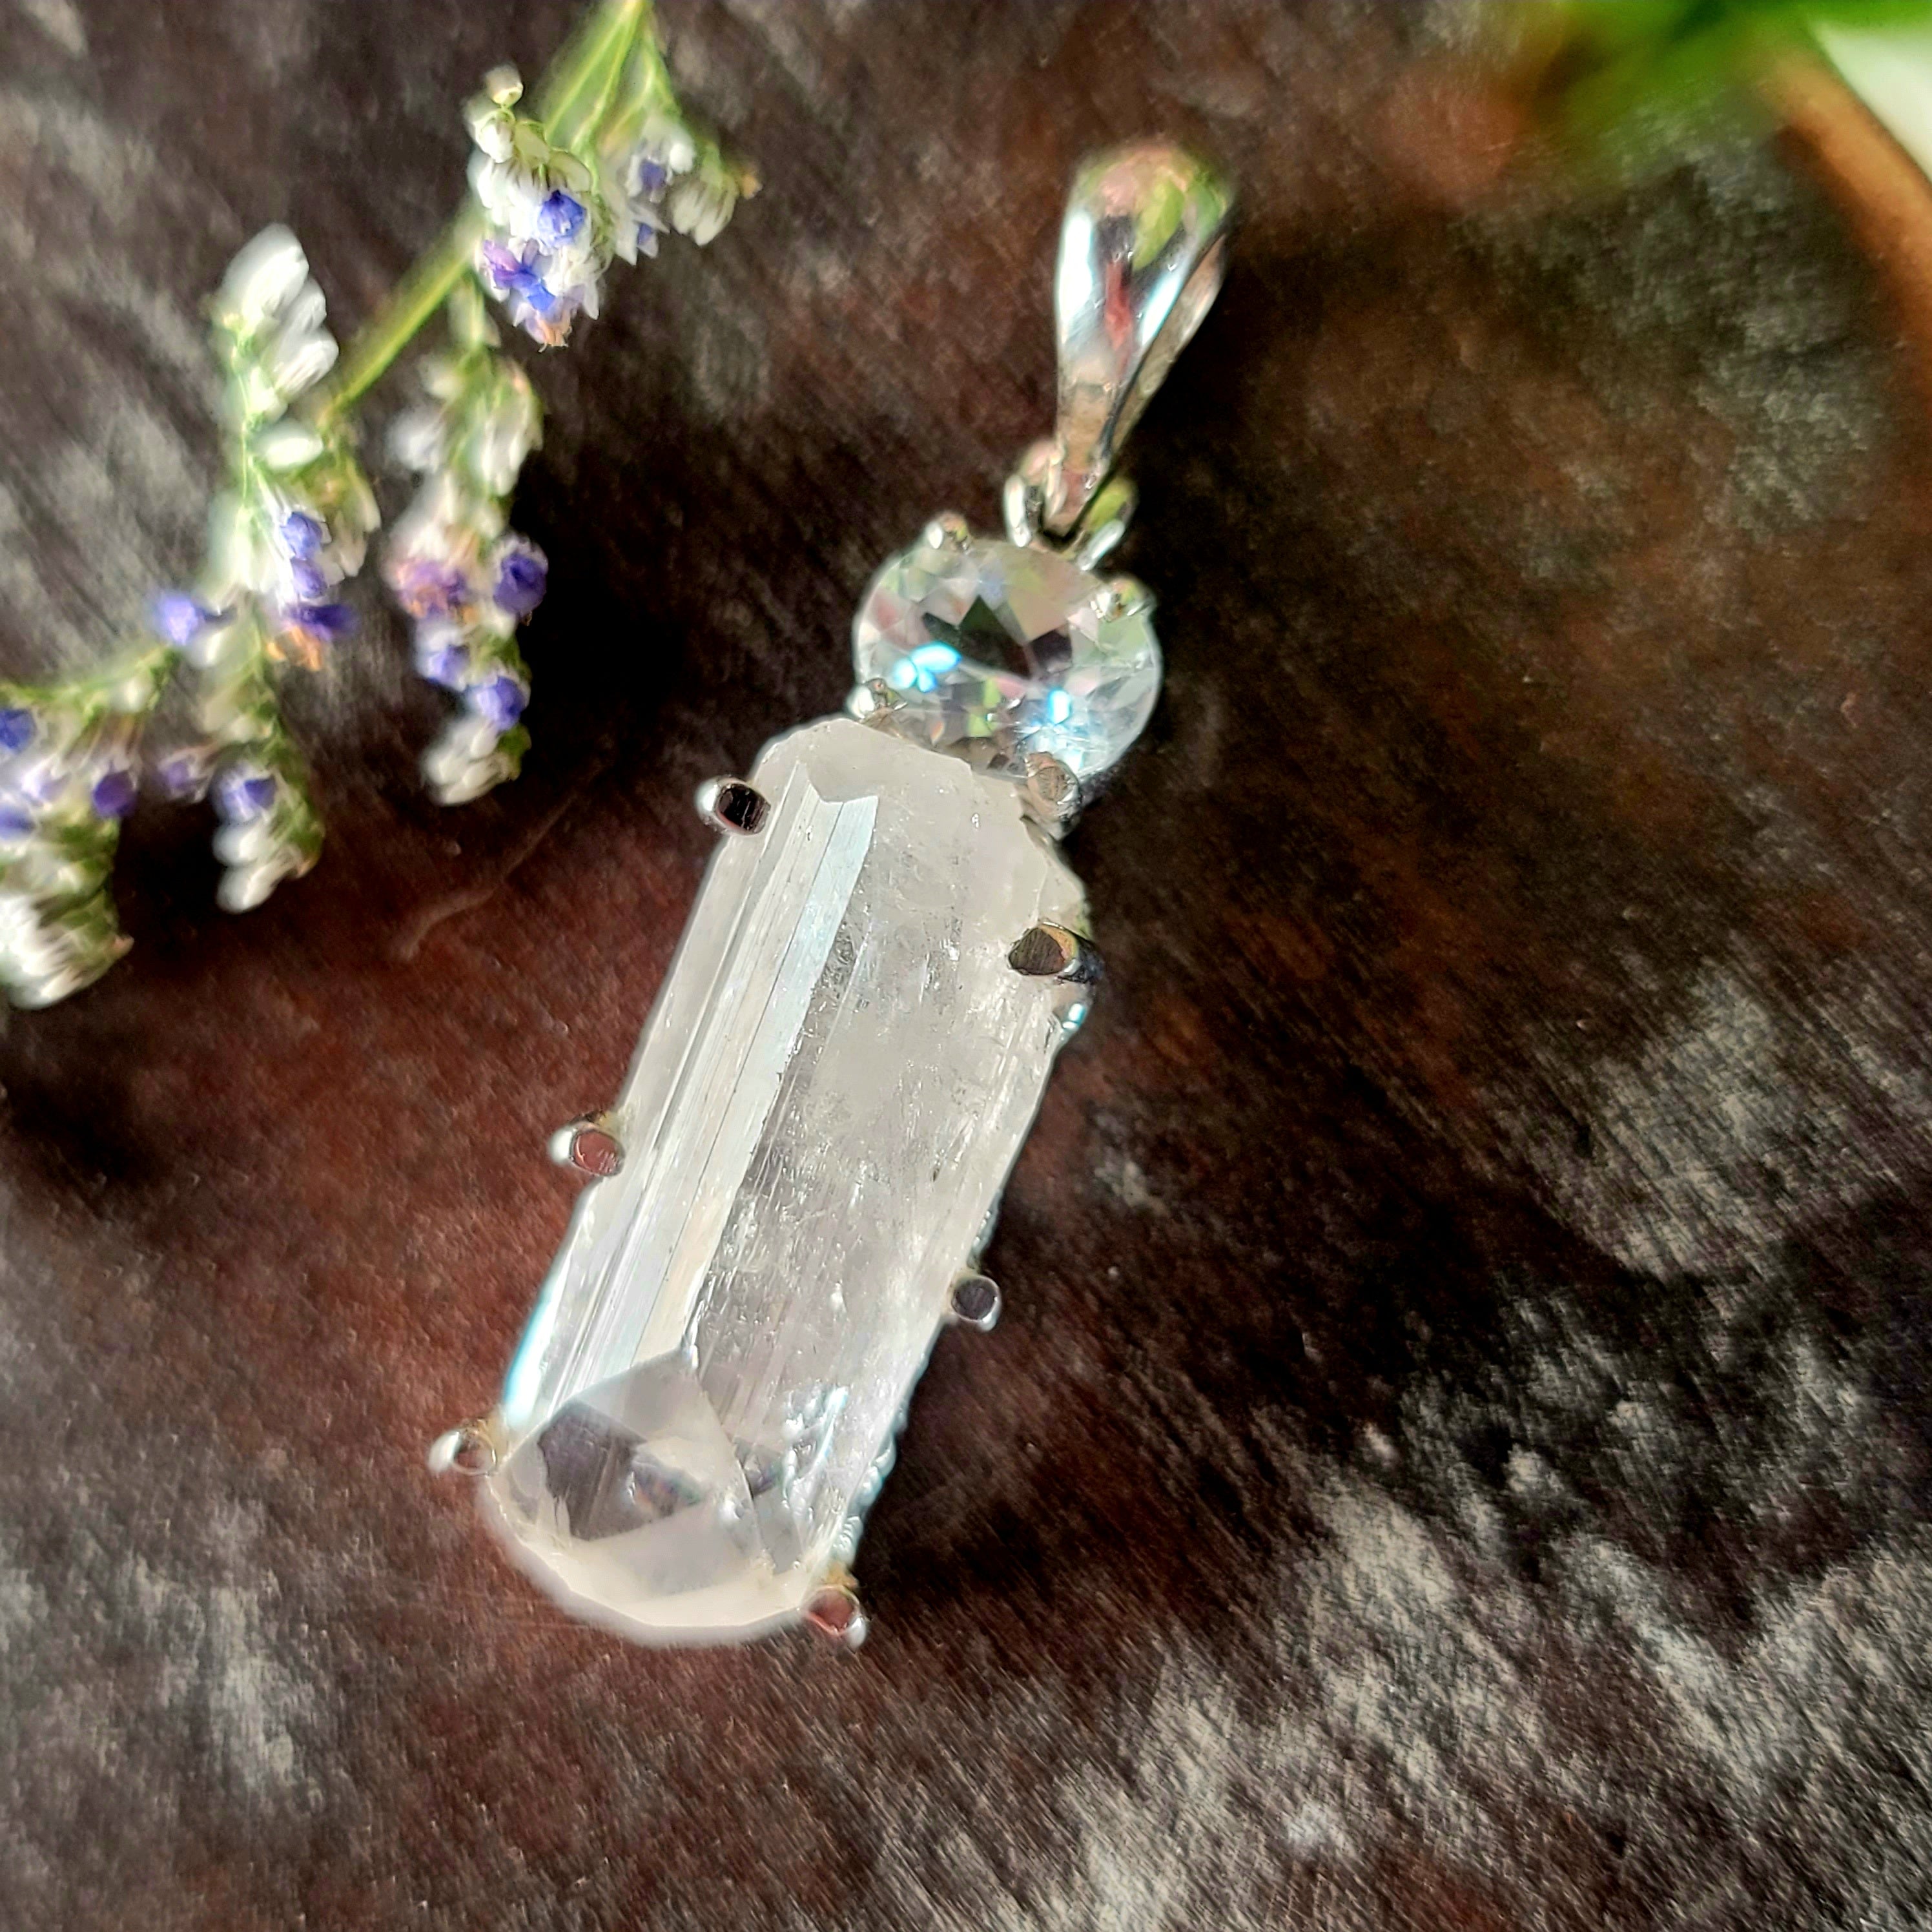 Danburite x White Topaz Pendant .925 Silver for Connection with Higher Realms, Peace and Self Acceptance